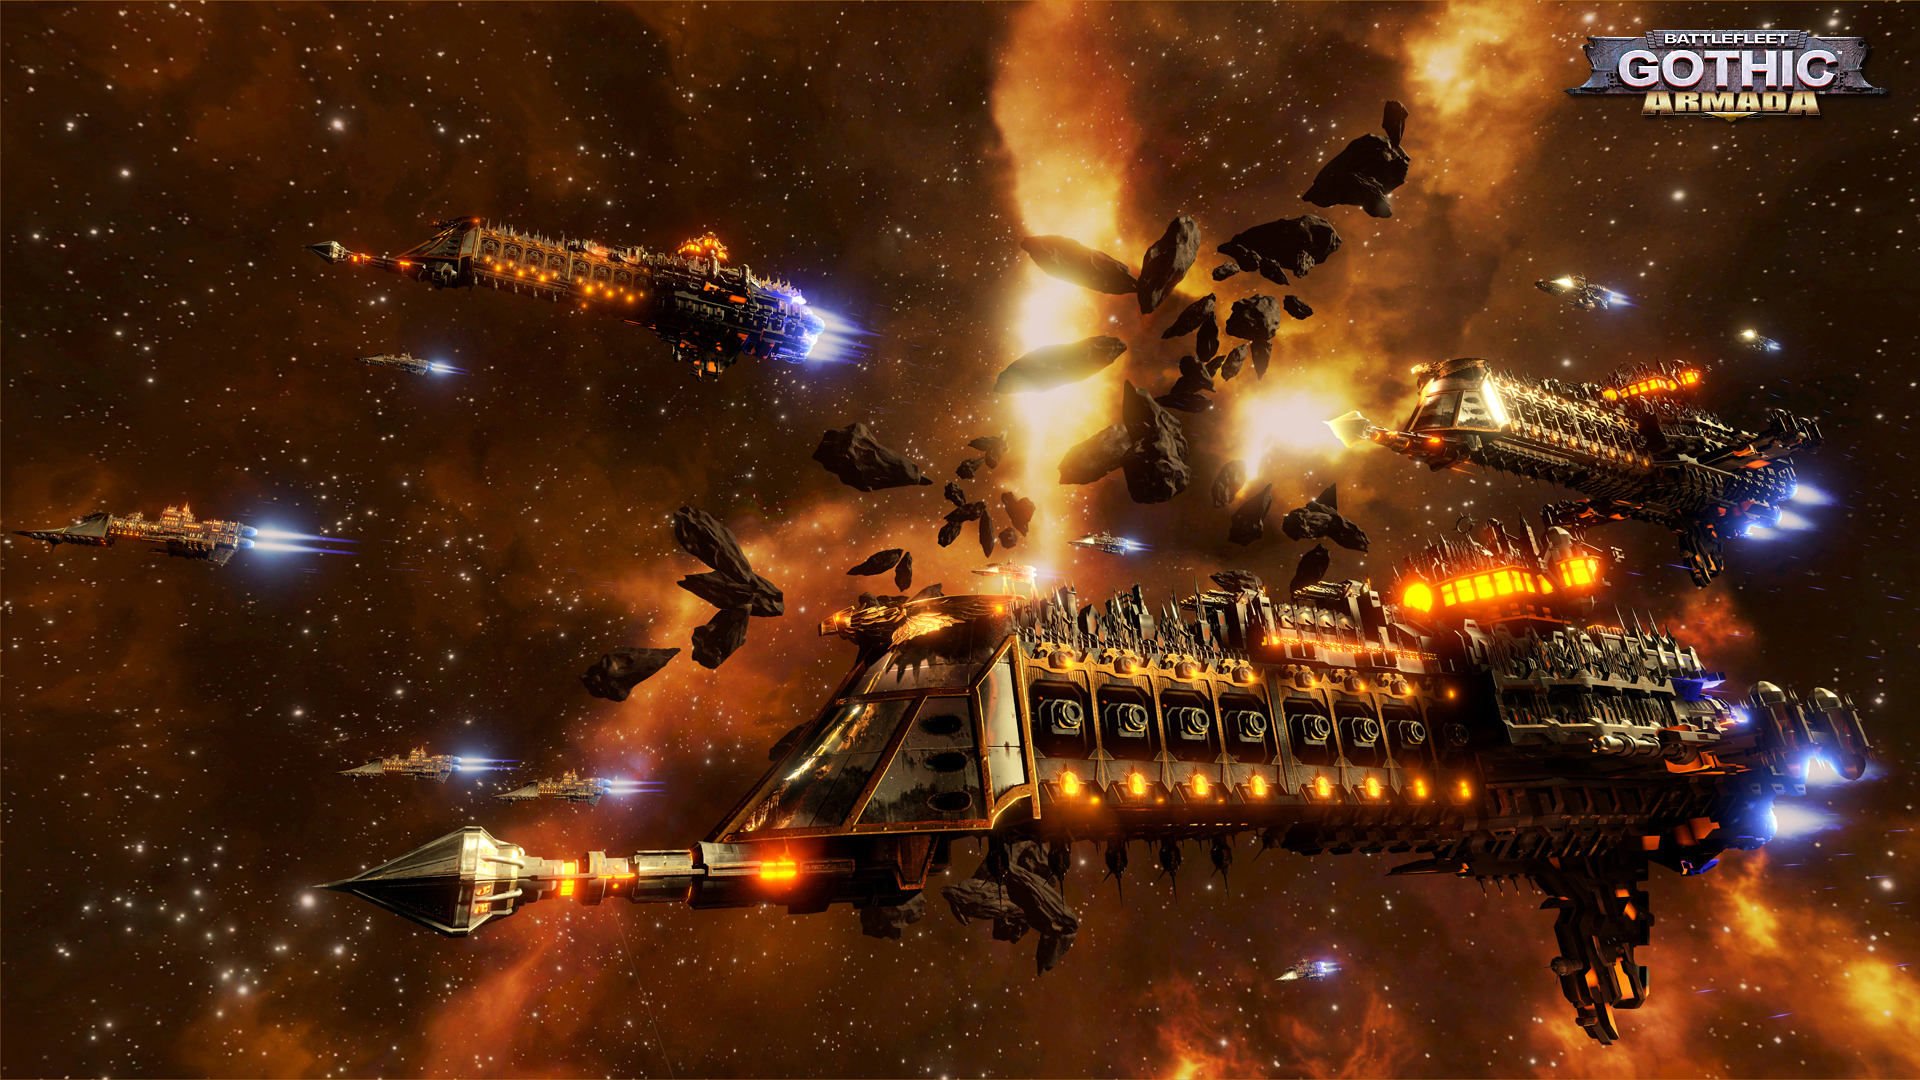 Battlefleet Gothic: Armada, one of the more successful Warhammer related titles. 